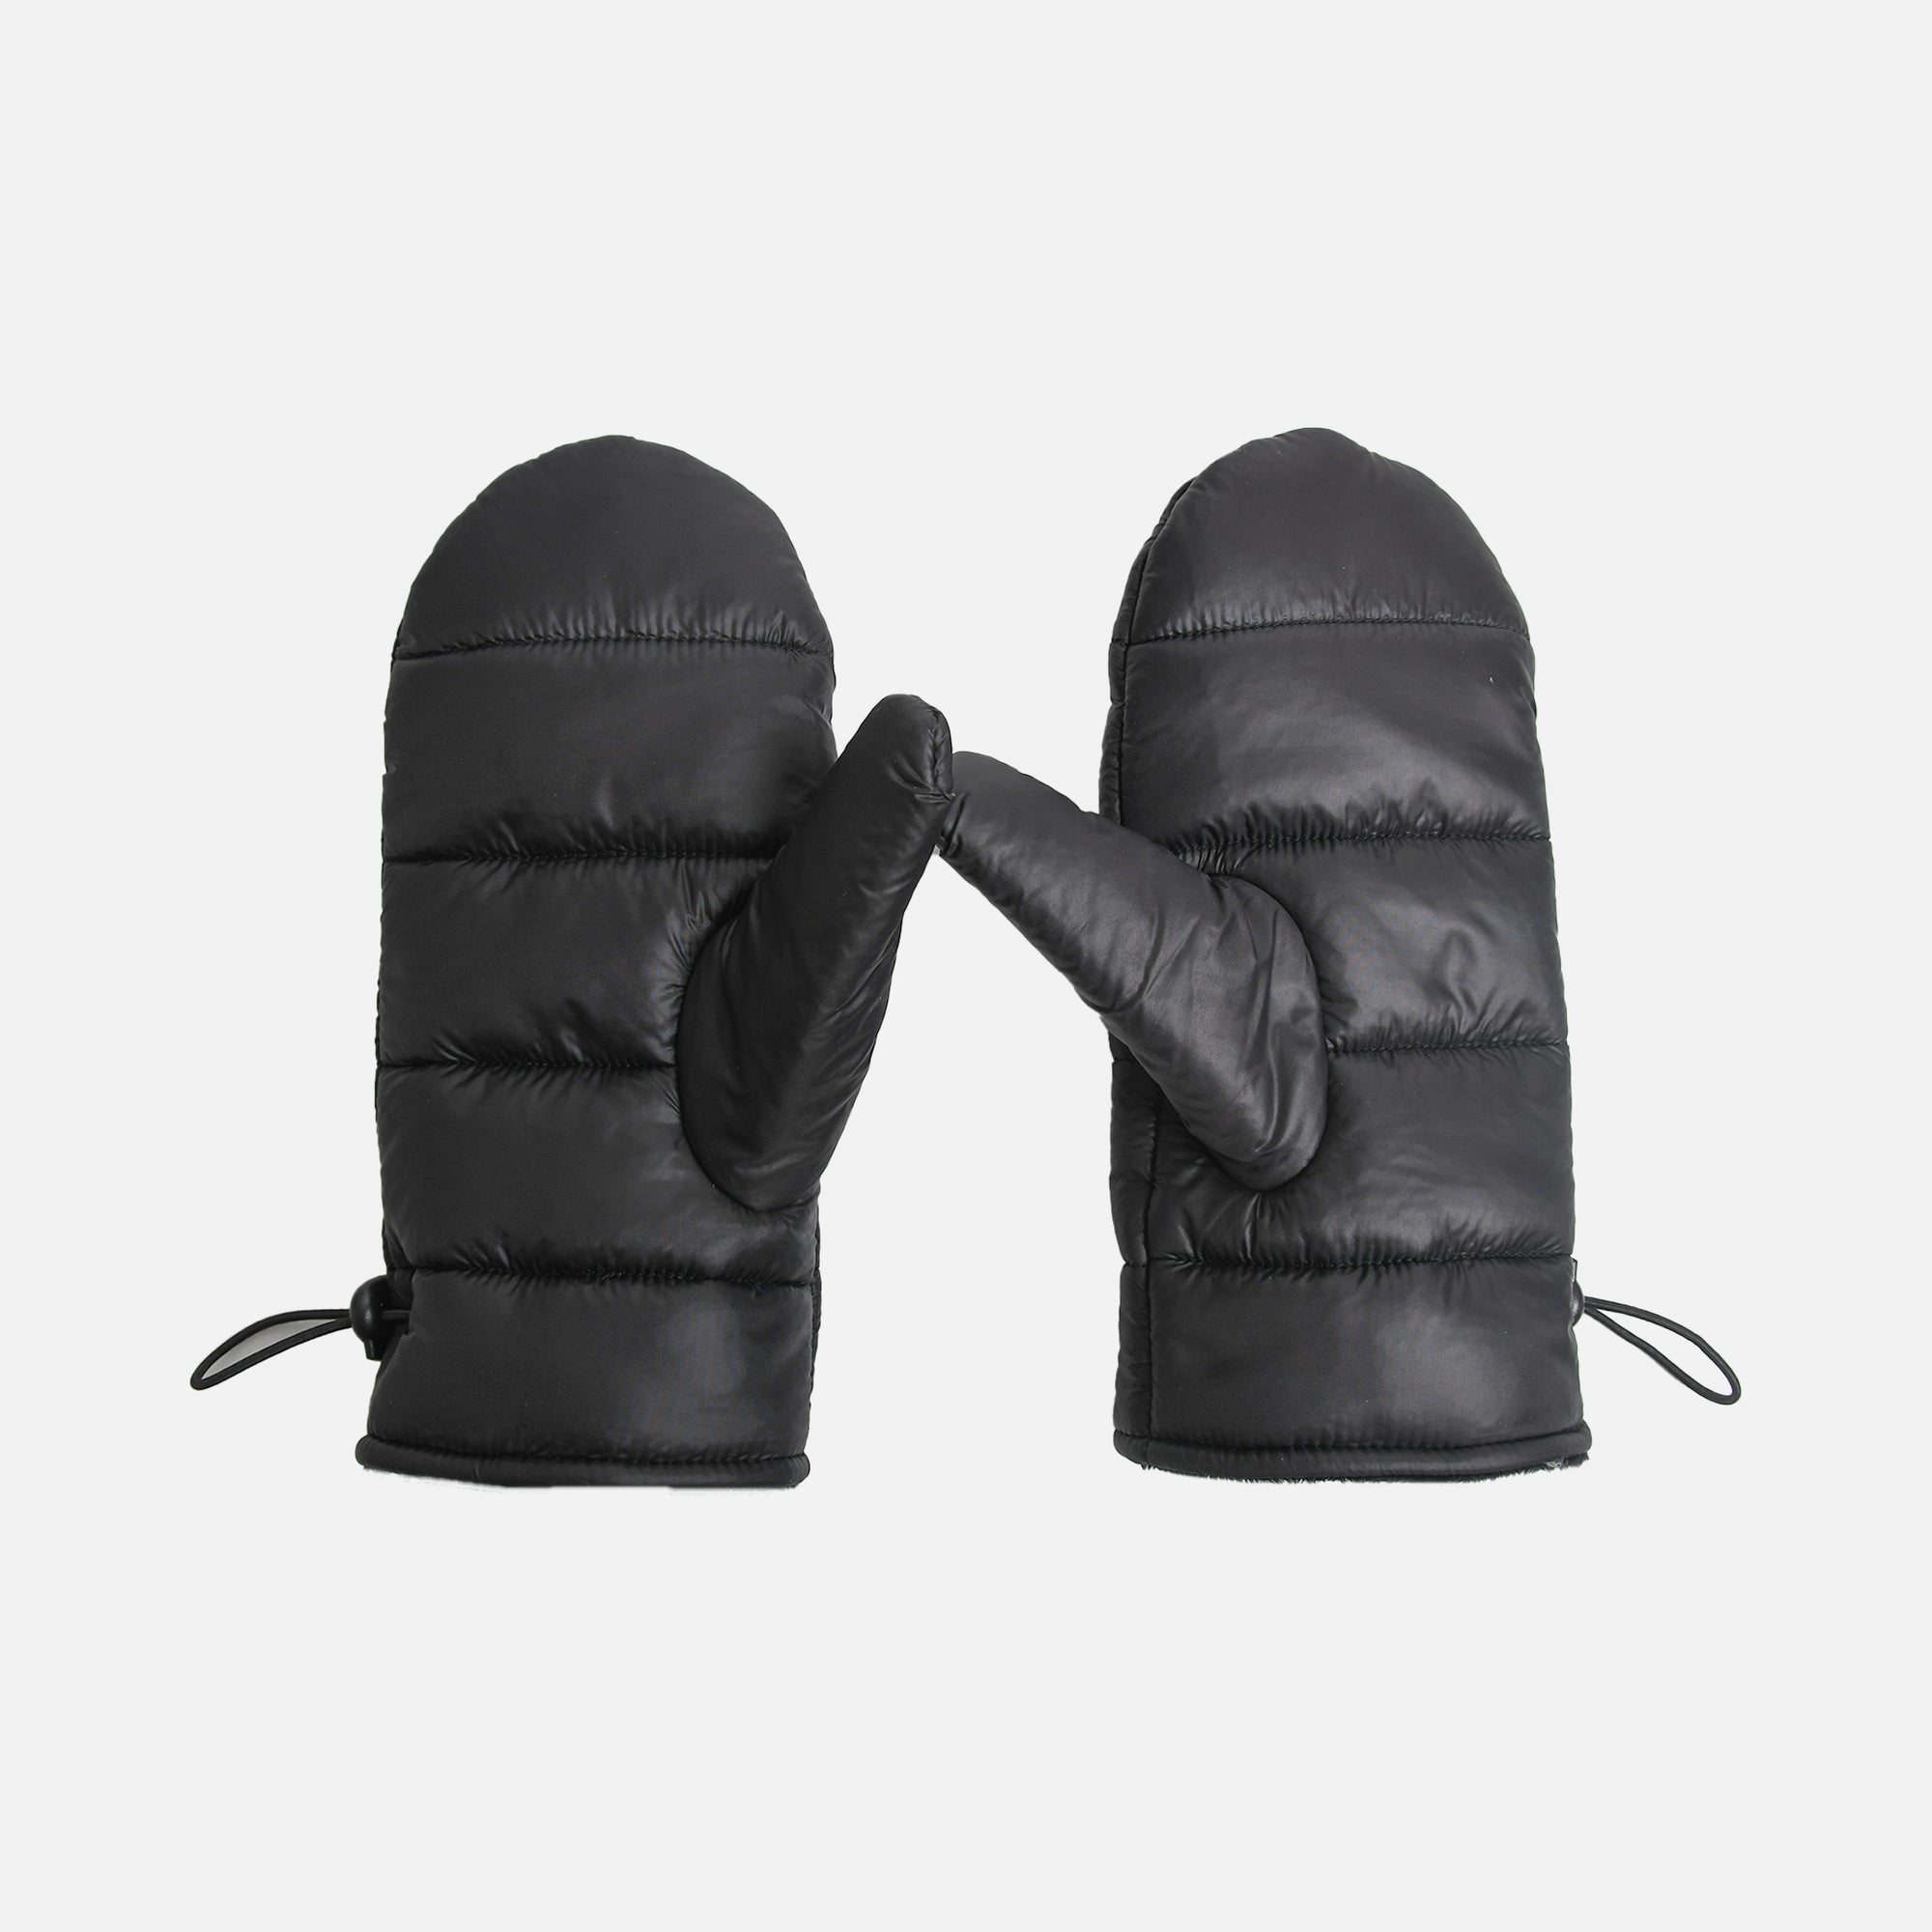 Black padded mittens with adjustable elastic